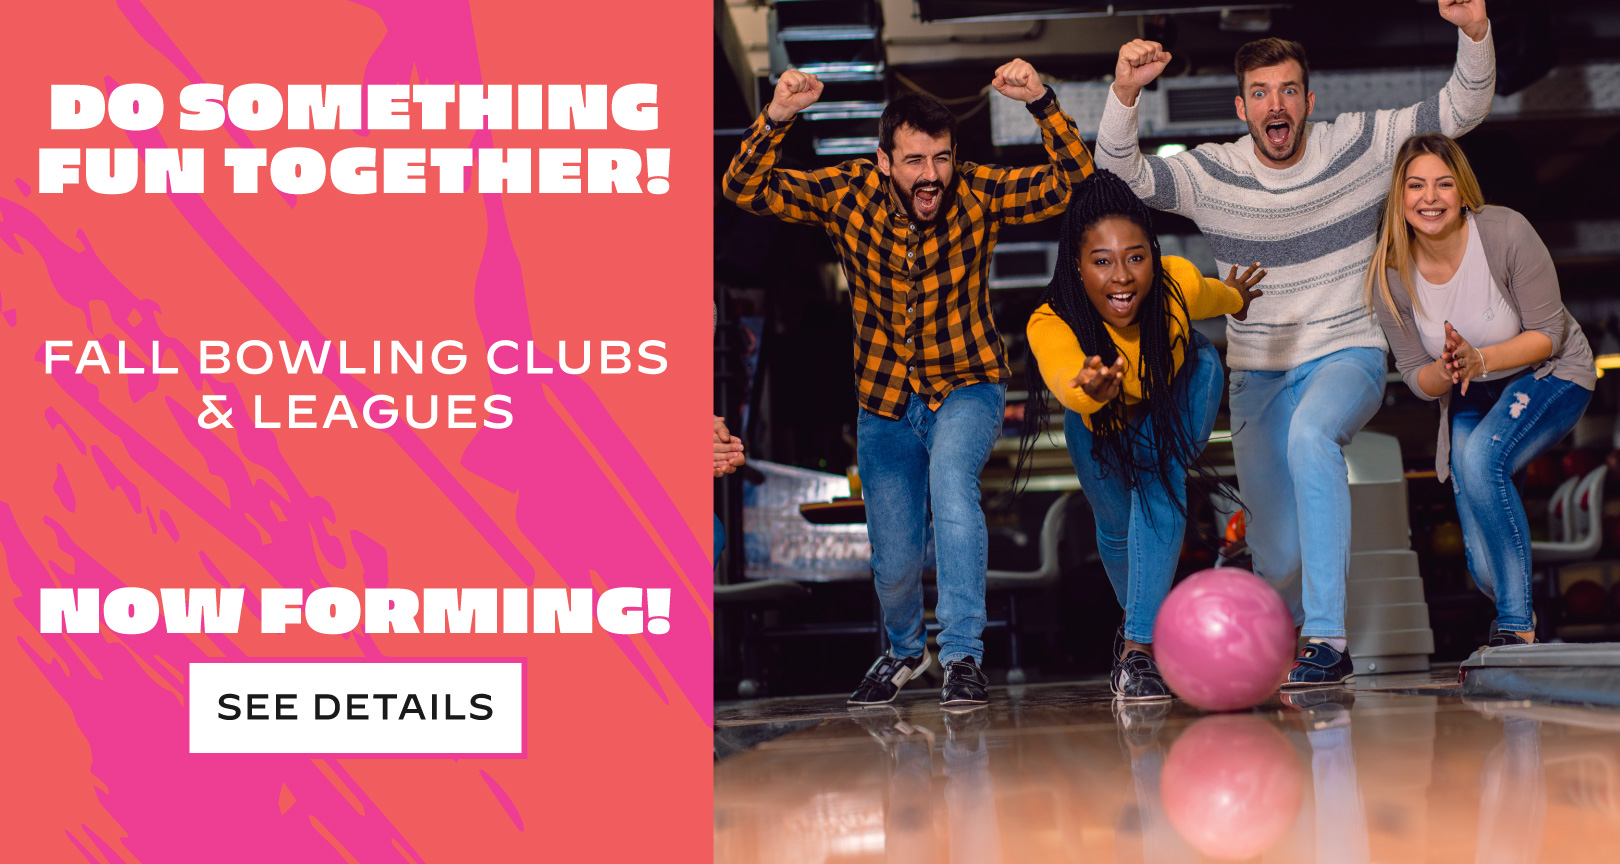 Fall Bowling Leagues and Clubs Now Forming